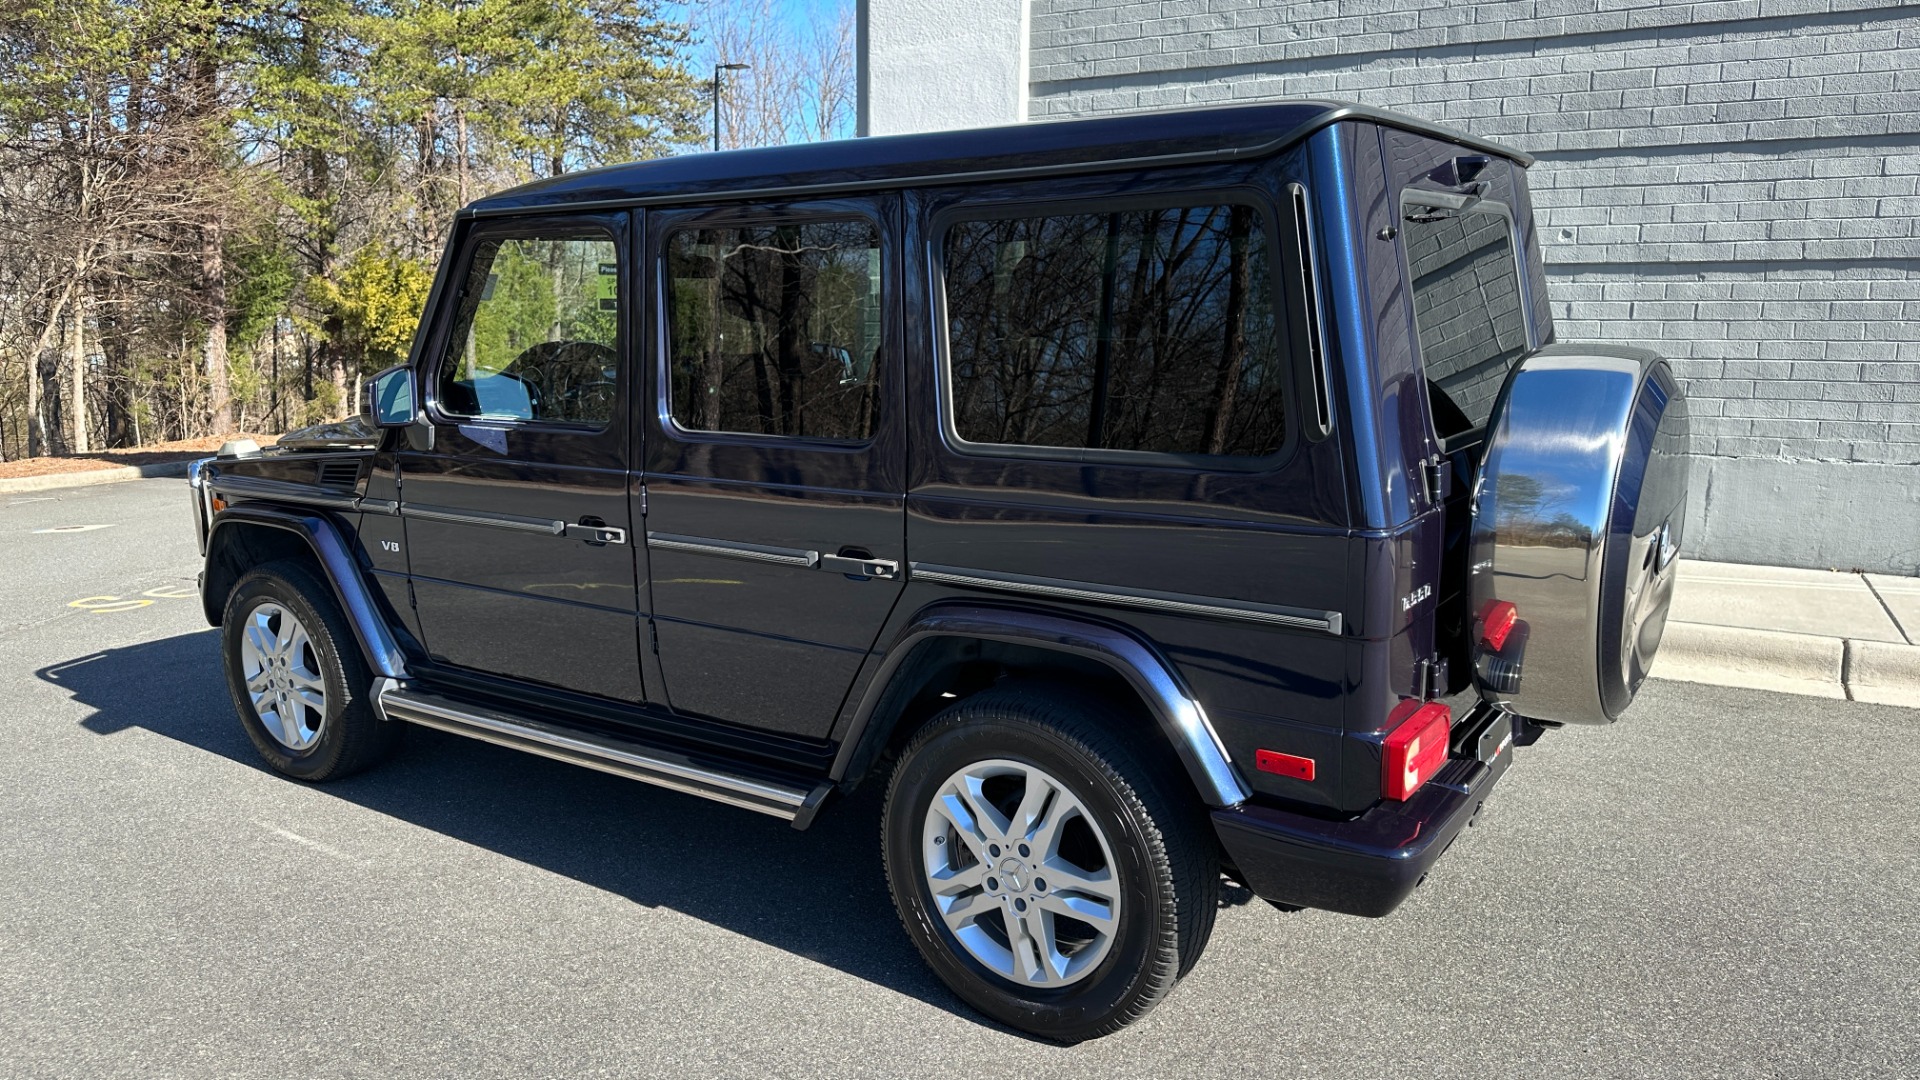 Used 2015 Mercedes-Benz G-Class G550 / DESIGNO NAPPA LEATHER / DESIGNO HEADLINER / HEATED STEERING / NAV /  for sale Sold at Formula Imports in Charlotte NC 28227 7